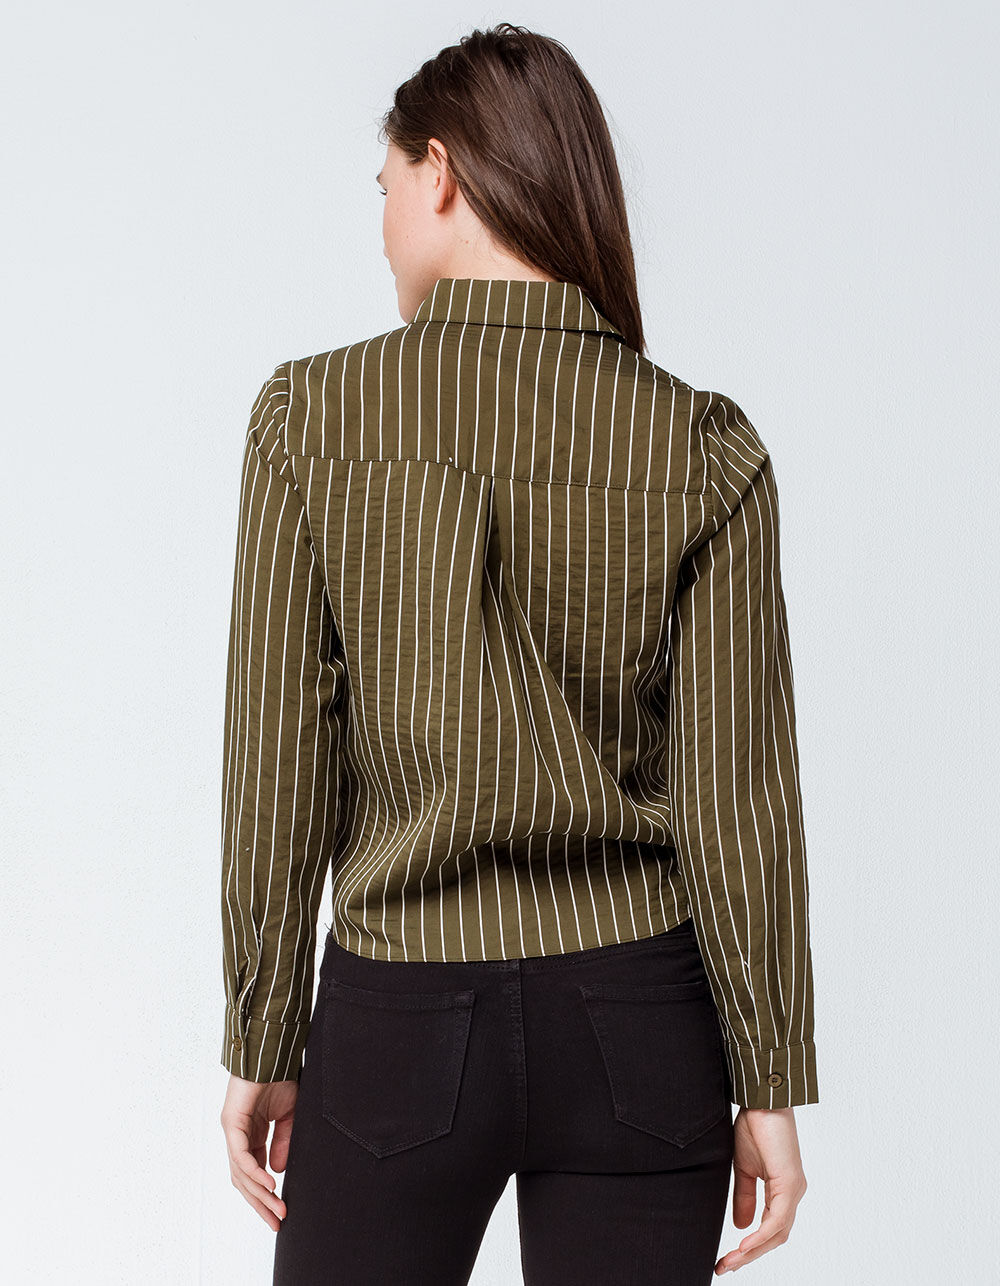 SKY AND SPARROW Stripe Button Olive Womens Tie Front Top - OLIVE | Tillys